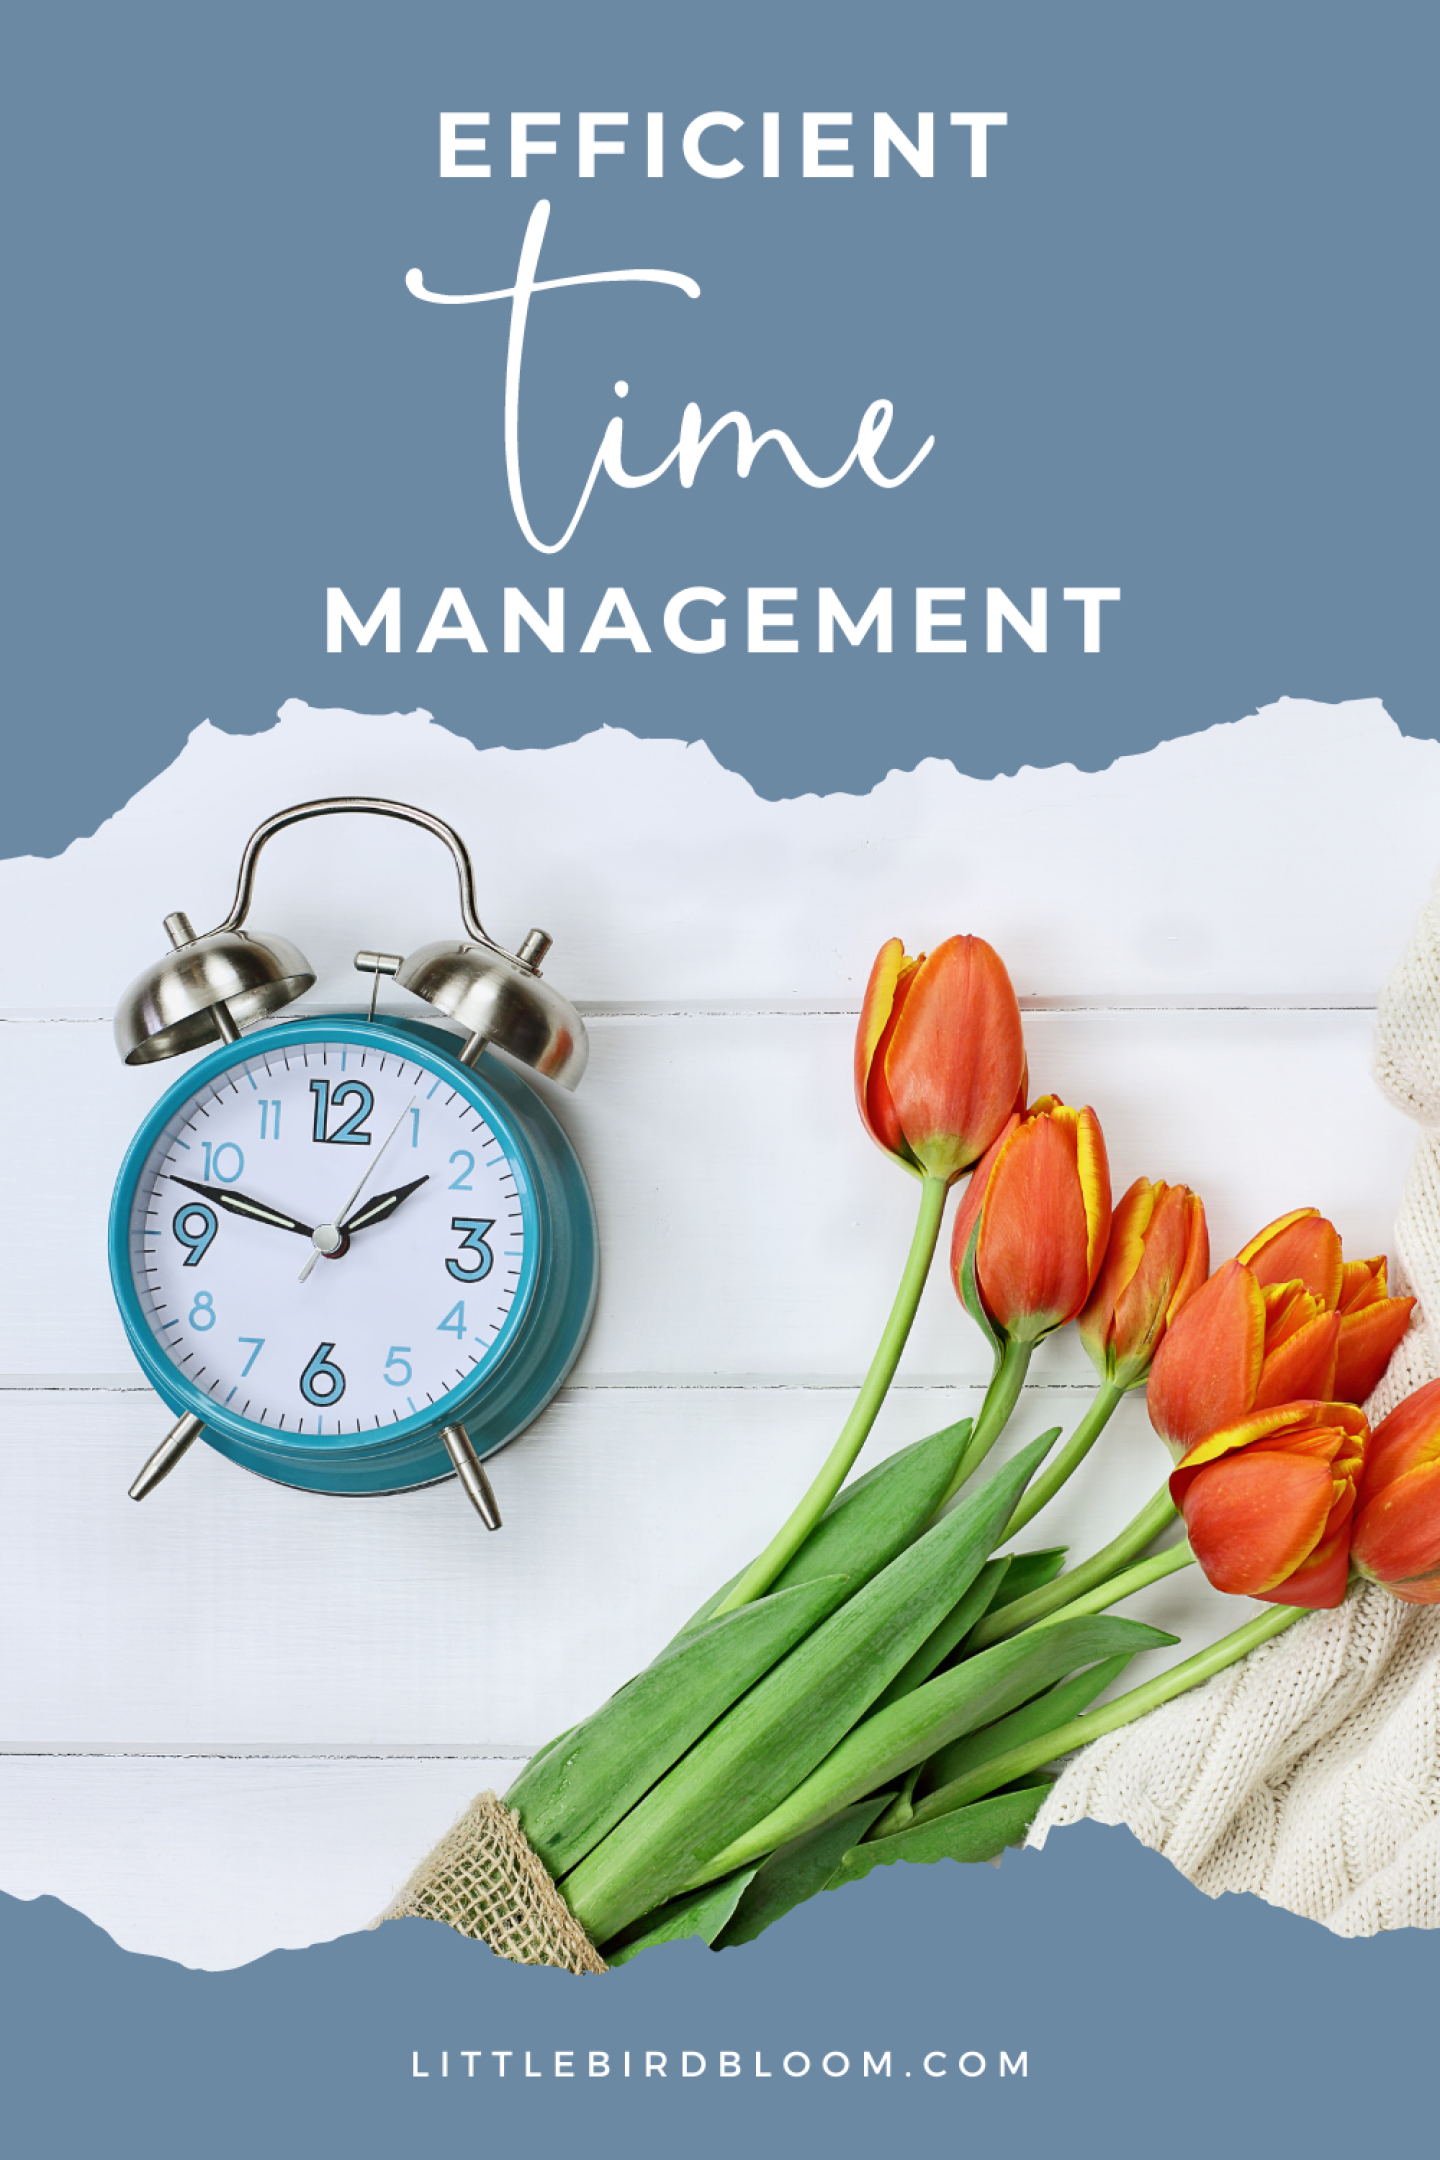 What are some good time management skills?